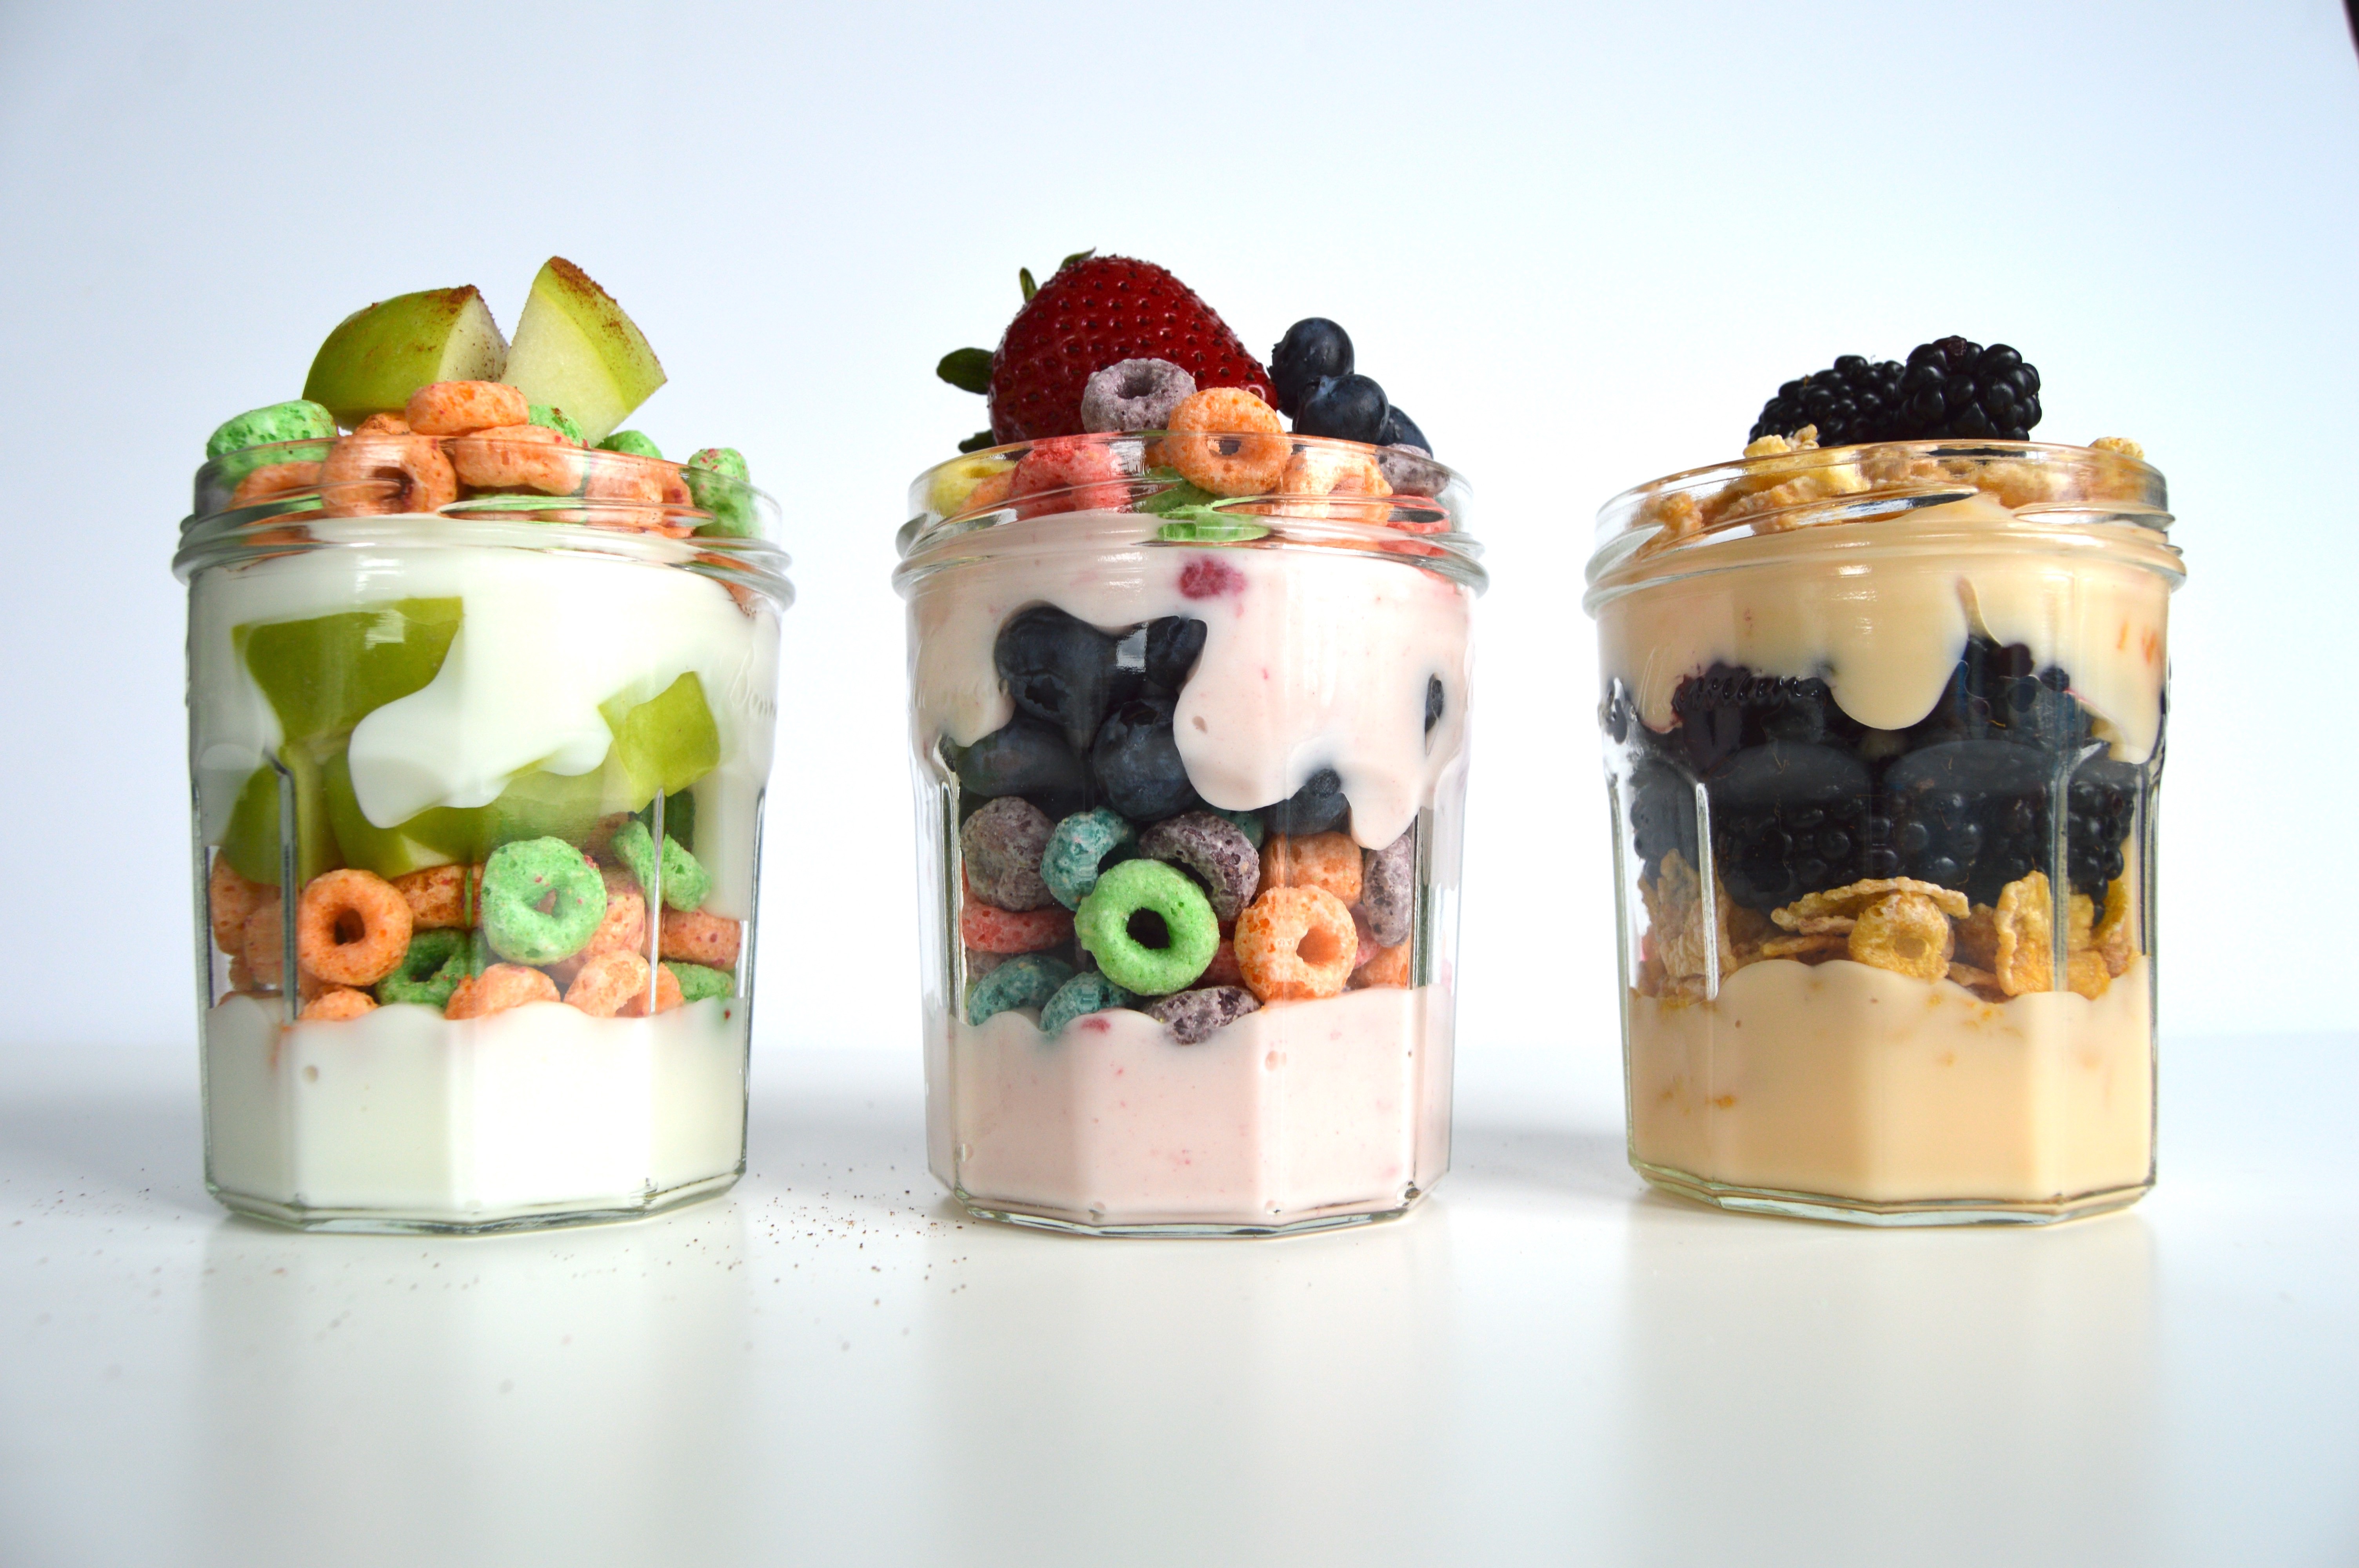 Layered cereal yogurt parfait with fruit for a fun breakfast. Ideas for Kellogg cereal parfait: Apple Jacks, Froot Loops, and Frosted Flakes. Fun breakfast idea!